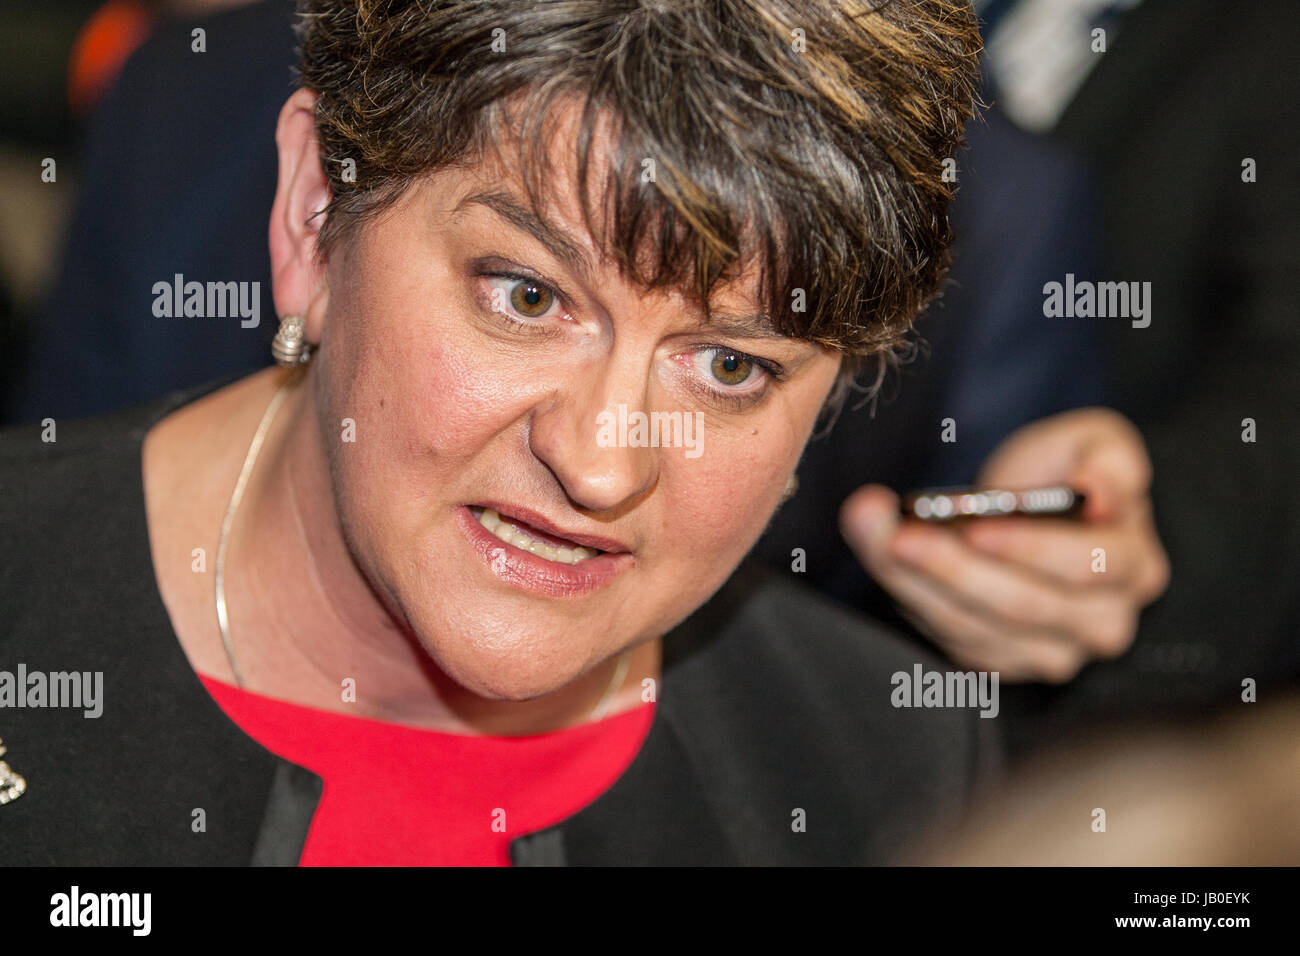 Belfast, Northern Ireland. 8th June 2017. Counting for the Belfast Area in the 2017 UK General Election got under way at the Titanic Exhibition Centre. Leader of DUP and First minister Arlene Foster at the Resut Count In Belfast Credit: Bonzo/Alamy Live News Stock Photo